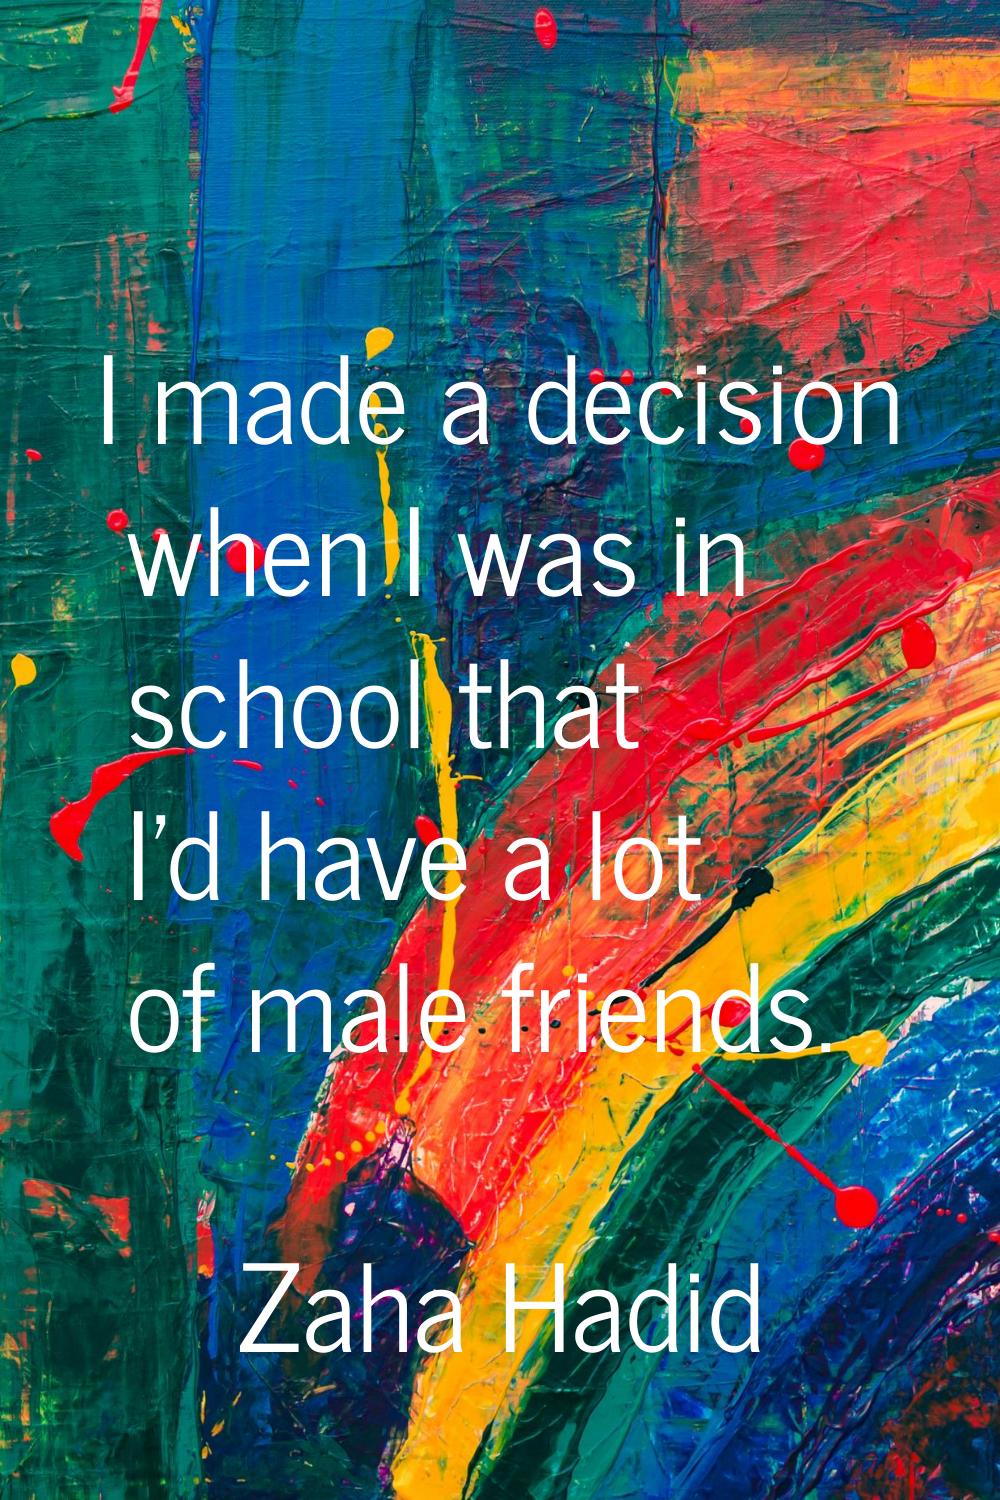 I made a decision when I was in school that I'd have a lot of male friends.